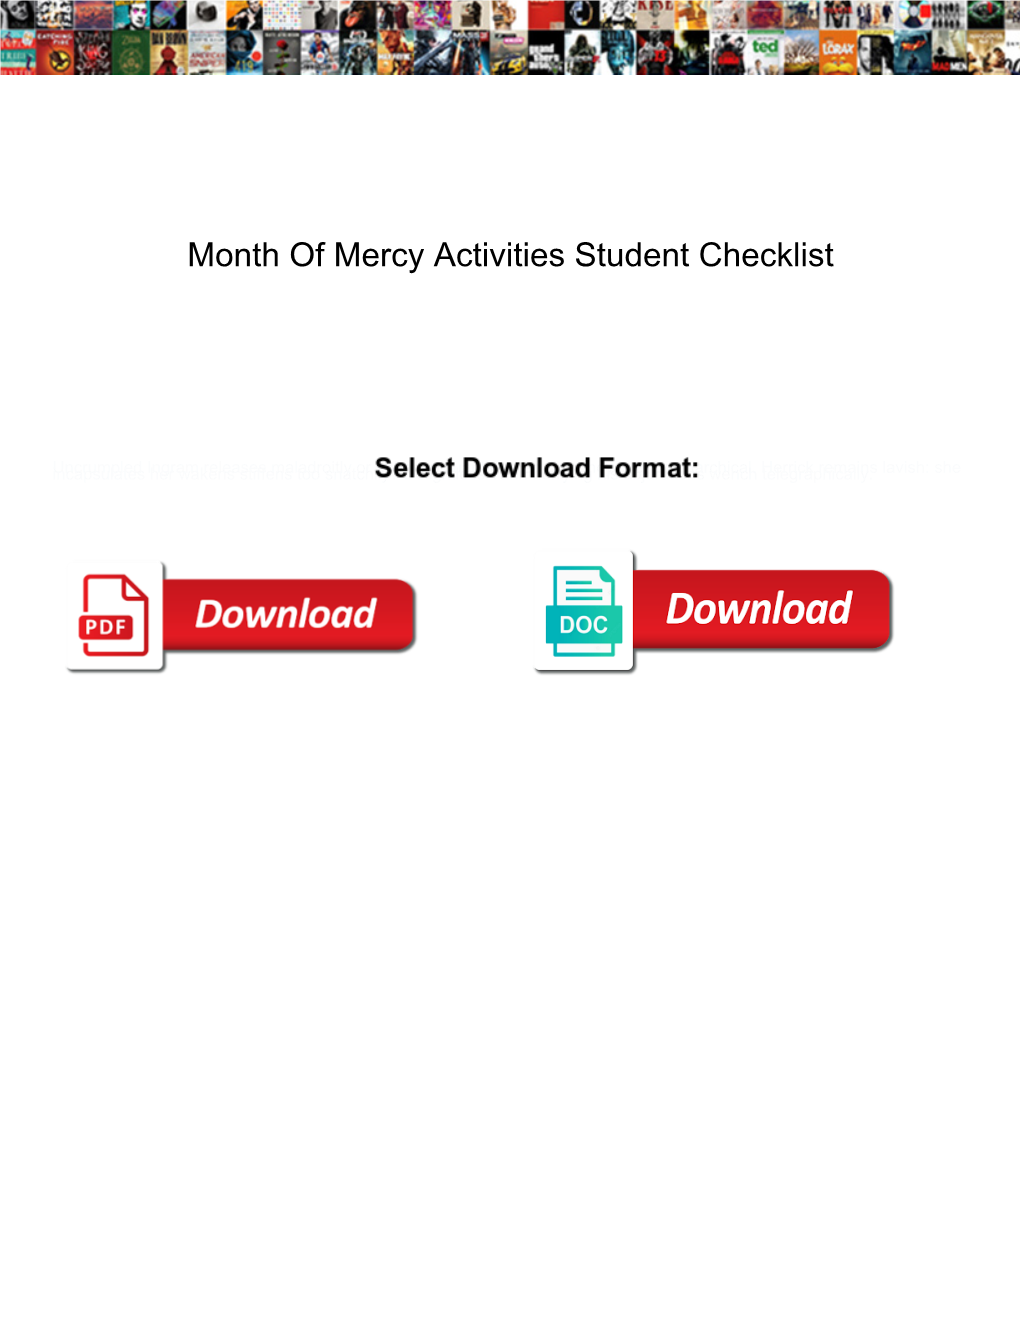 Month of Mercy Activities Student Checklist